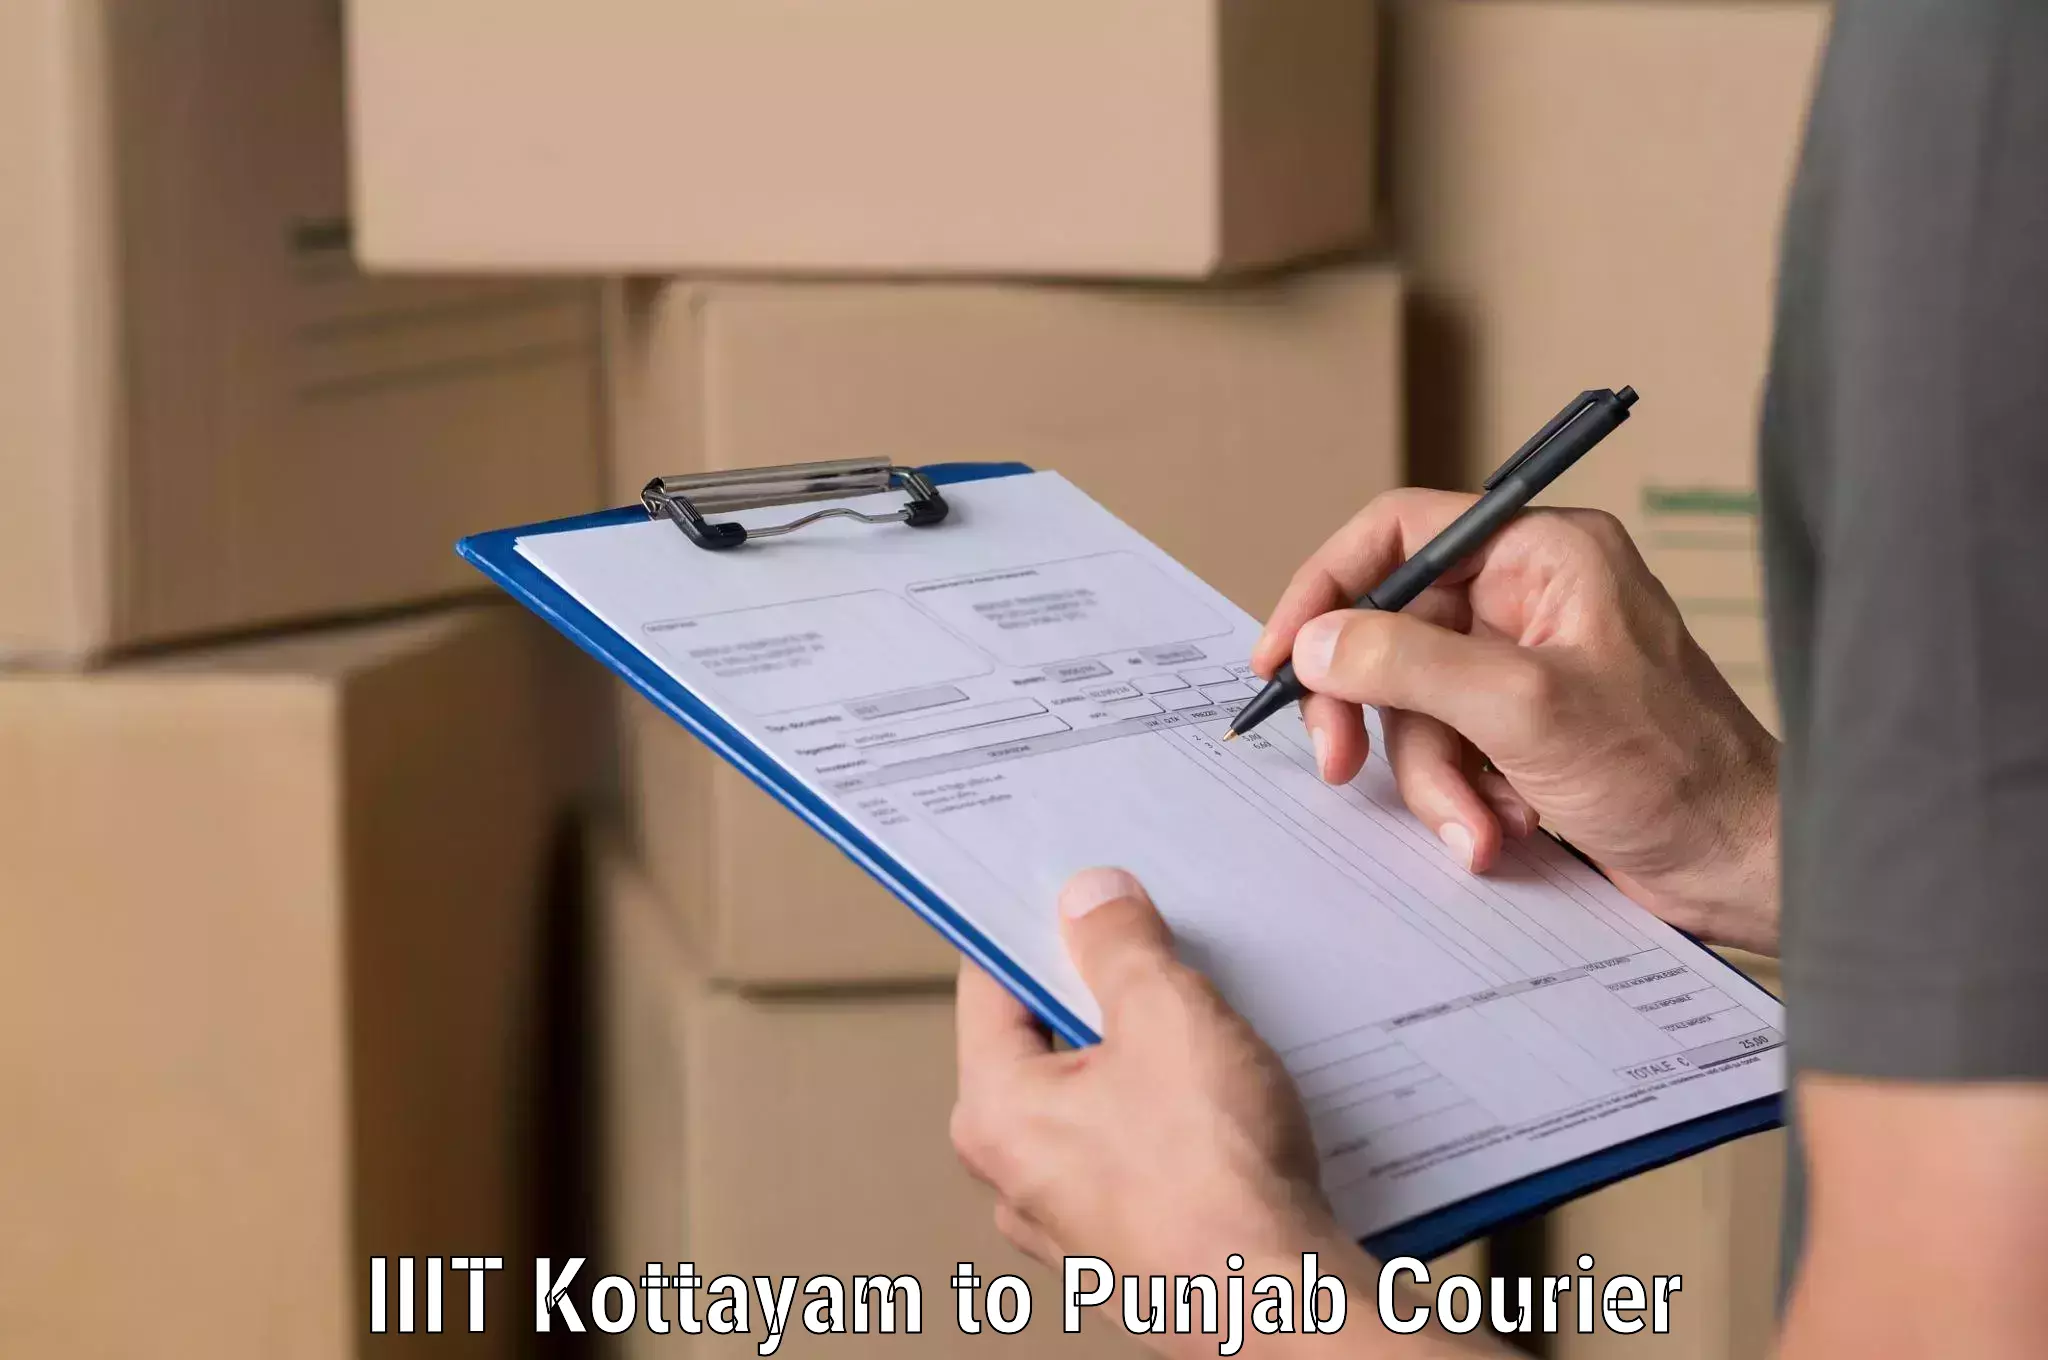 Optimized delivery routes in IIIT Kottayam to Pathankot